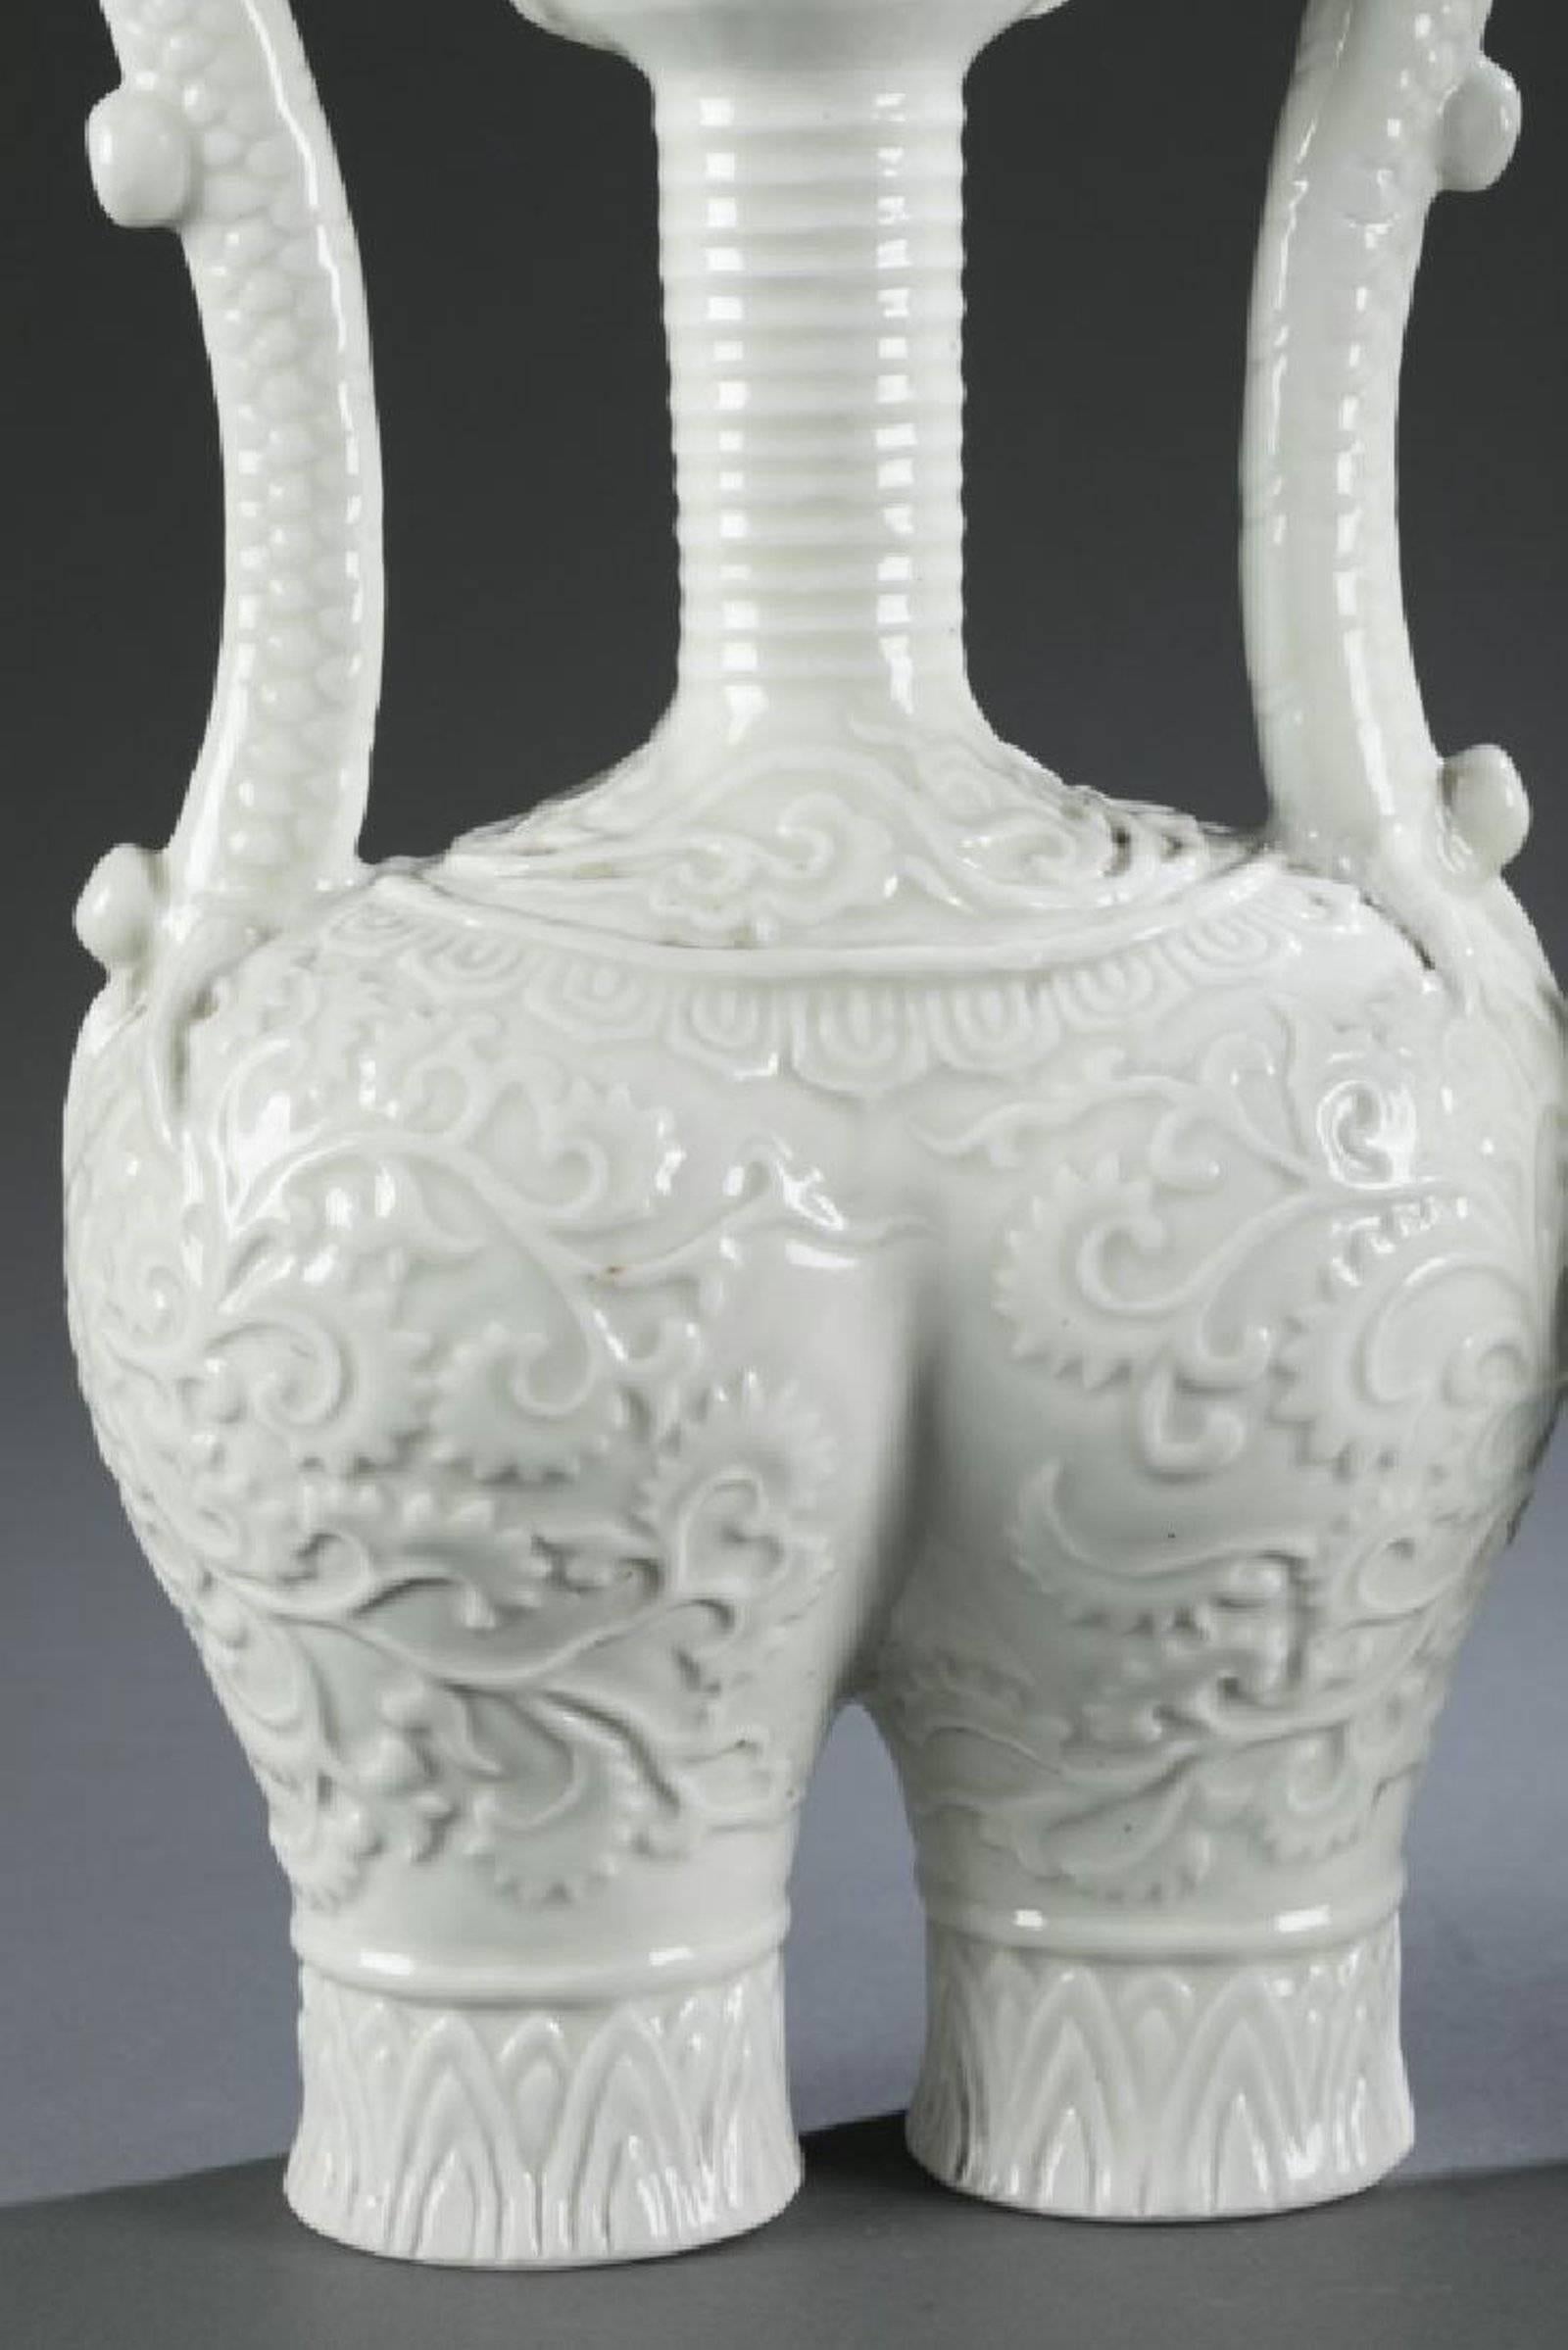 Highly unique of Blanc de Chine vessels with overall pattern of vines on the double base body with slim double dragon handles. 14 inches high. Sold individually.

 